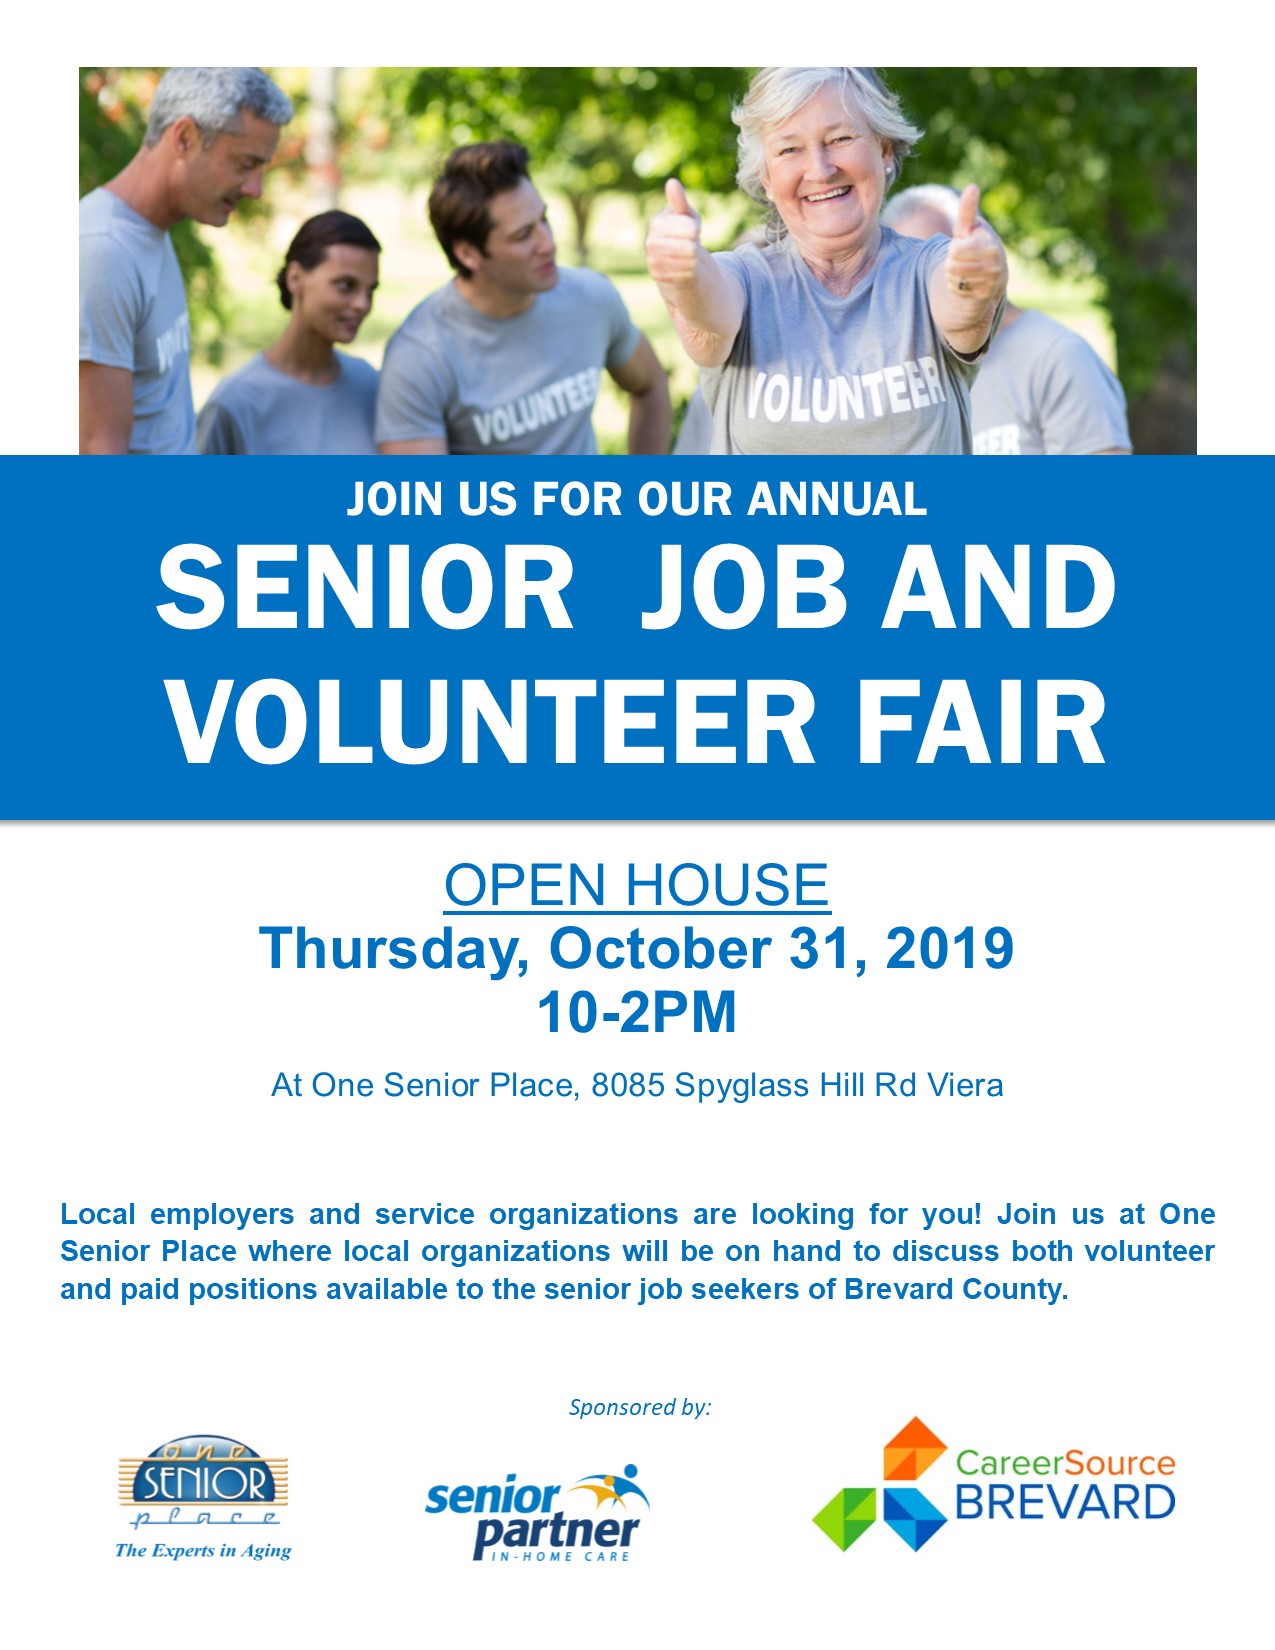 Annual Senior Job and Volunteer Fair sponsored by One Senior Place, Senior Partner Care Services and CareerSource Brevard